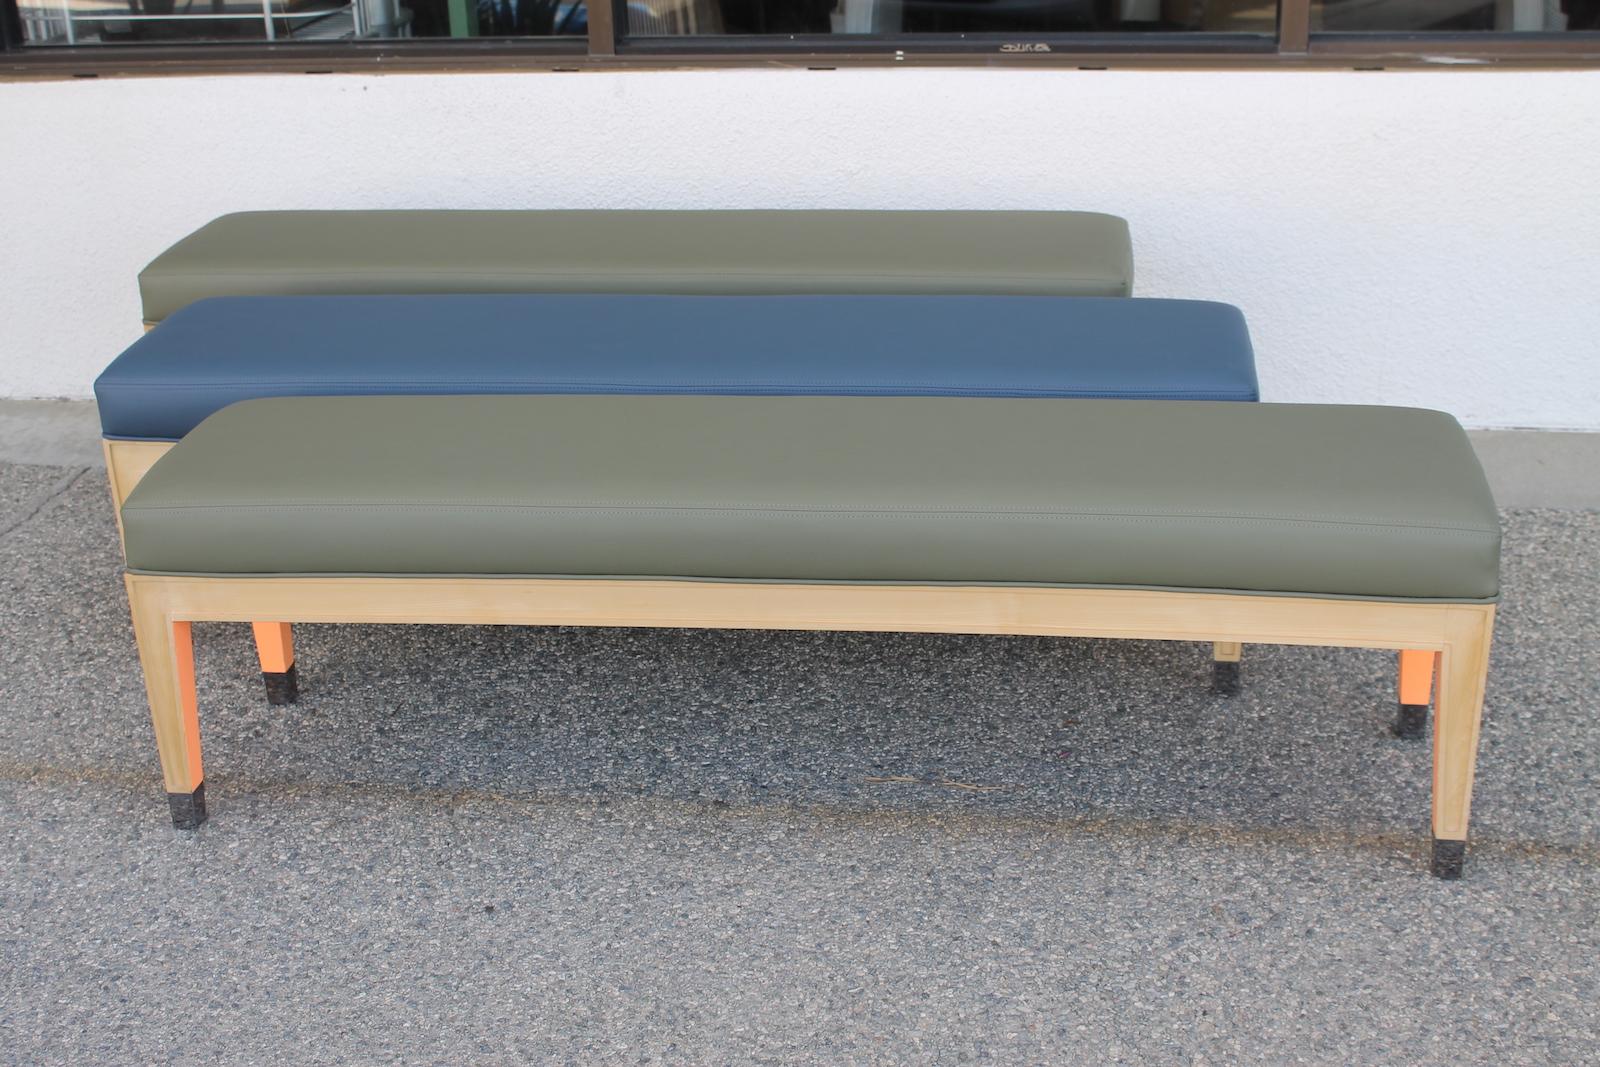 Late 20th Century Bench by Philippe Starck for the Clift Hotel, San Francisco